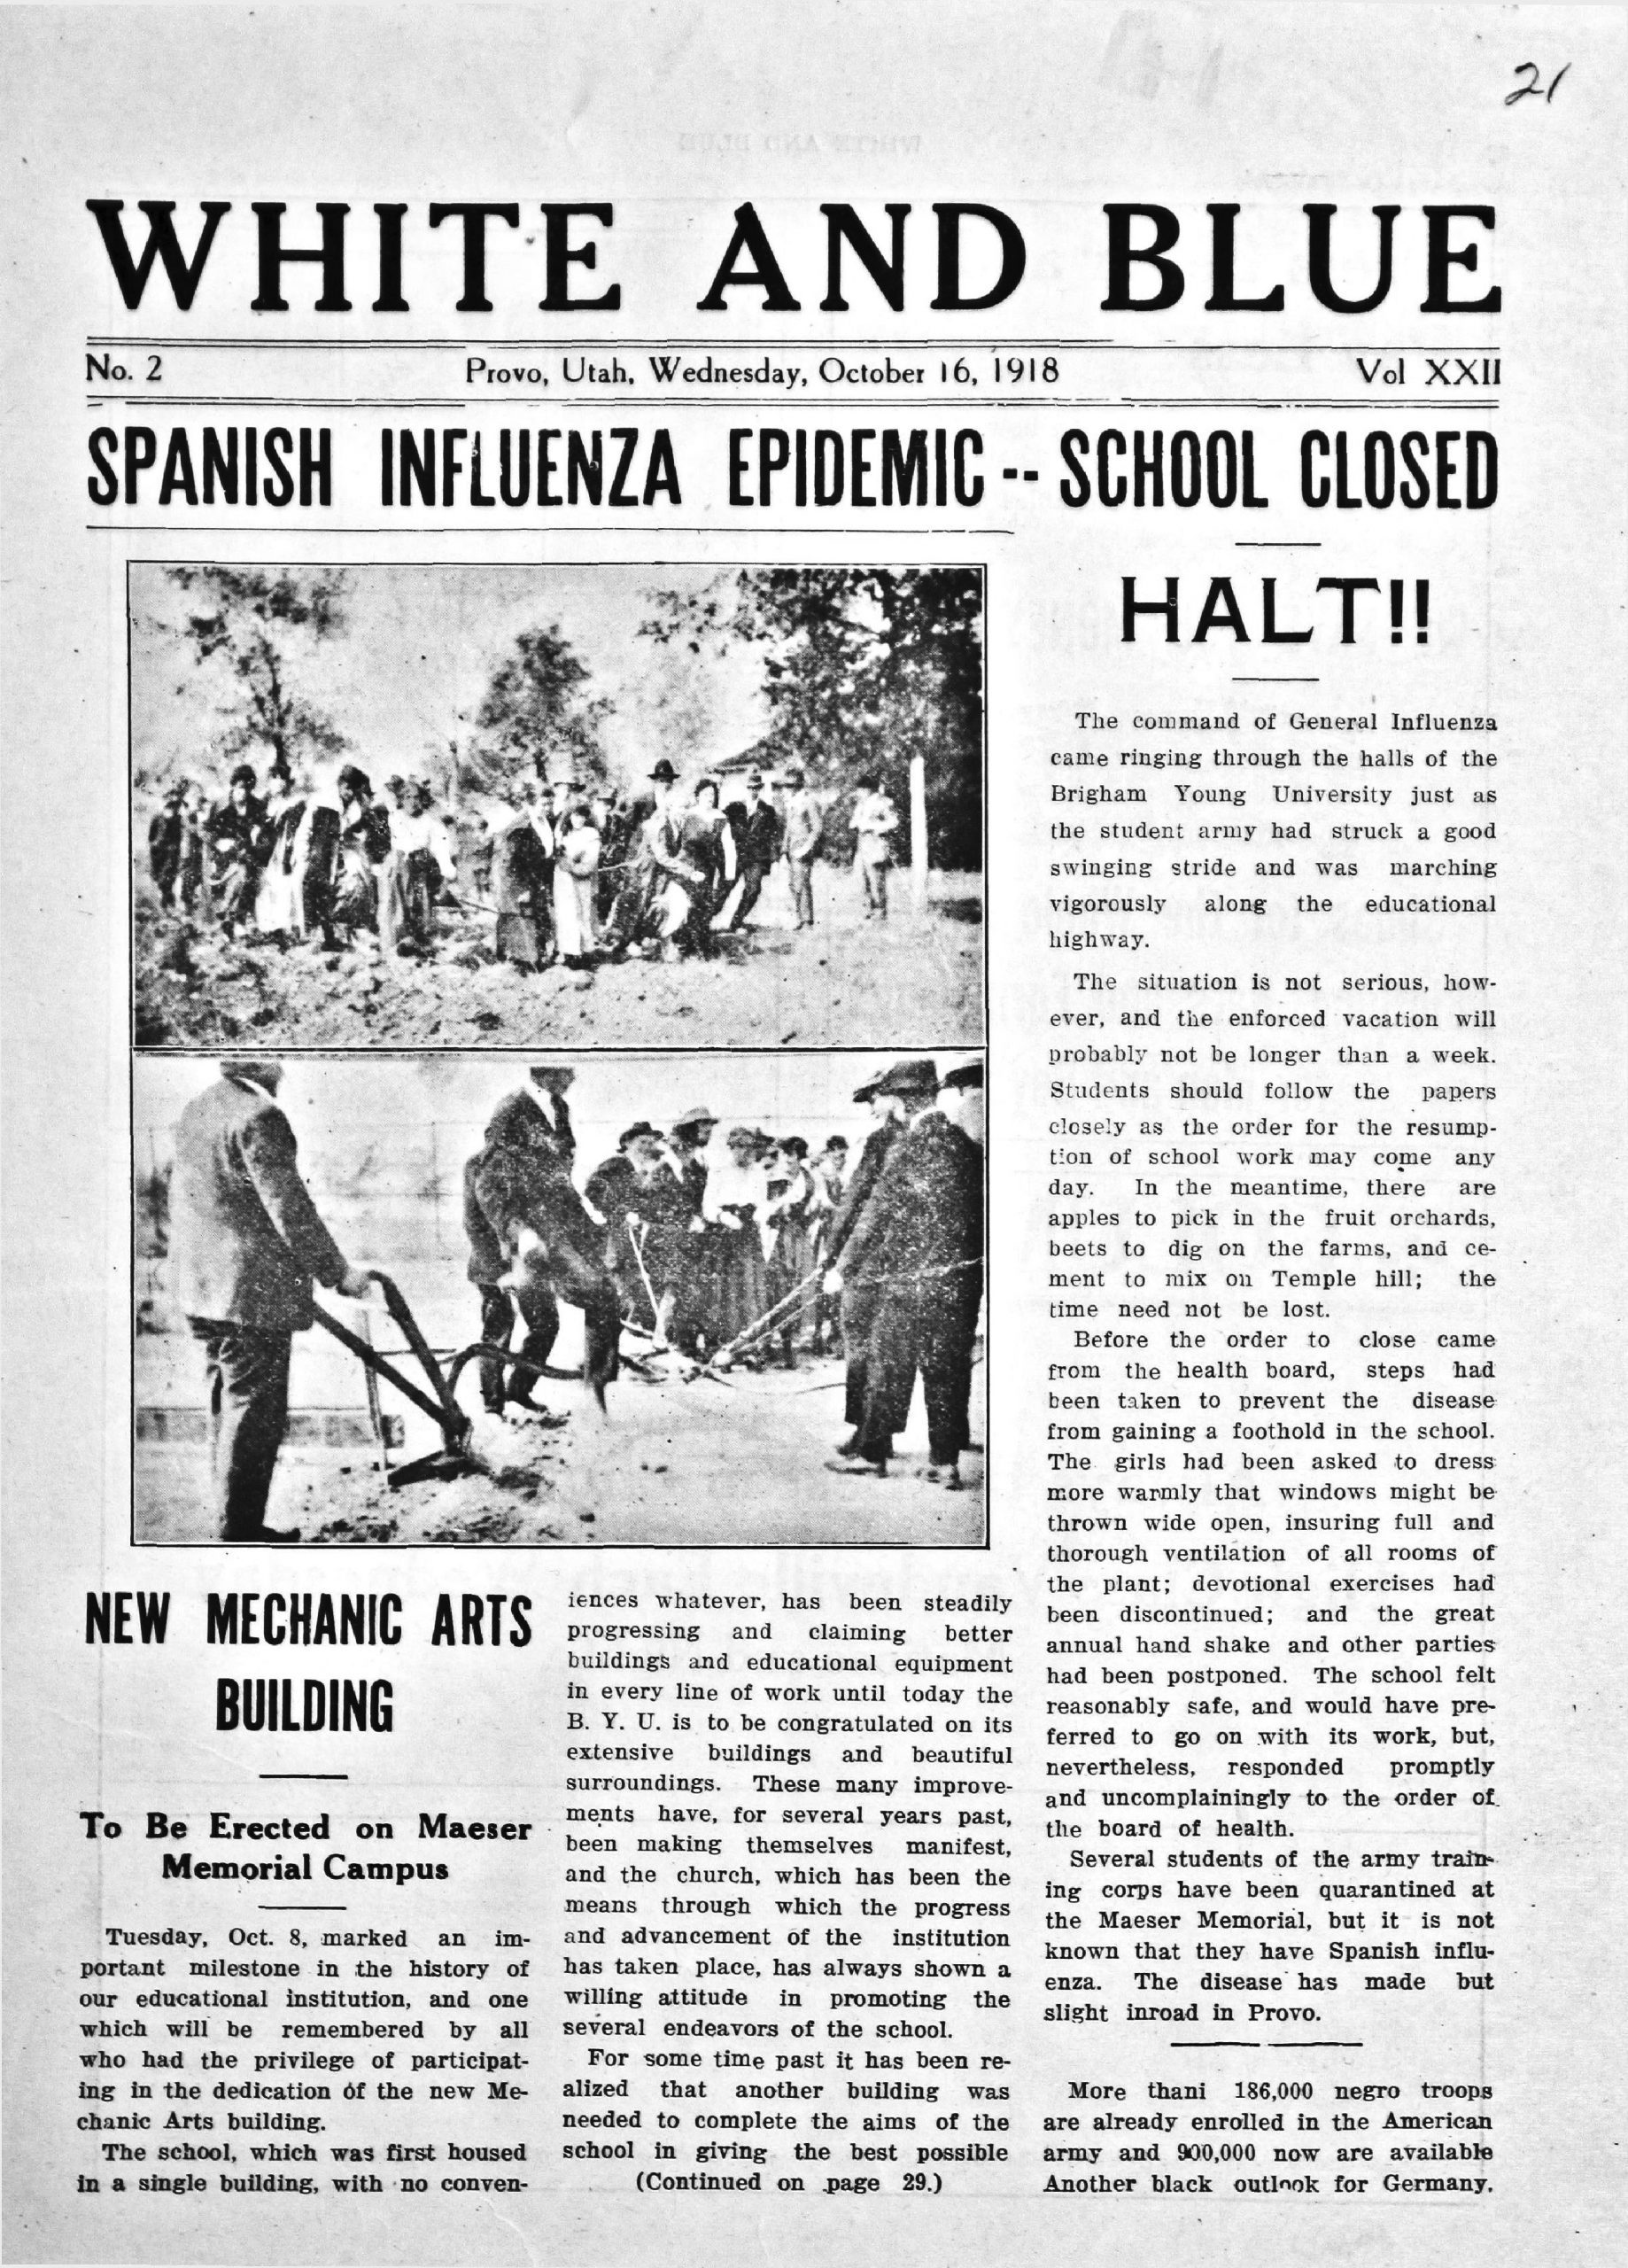 The front page of BYU's White and Blue student newspaper for October 16, 1918. The headline reads "Spanish Influenza Epidemic--School Closed. Halt!!"